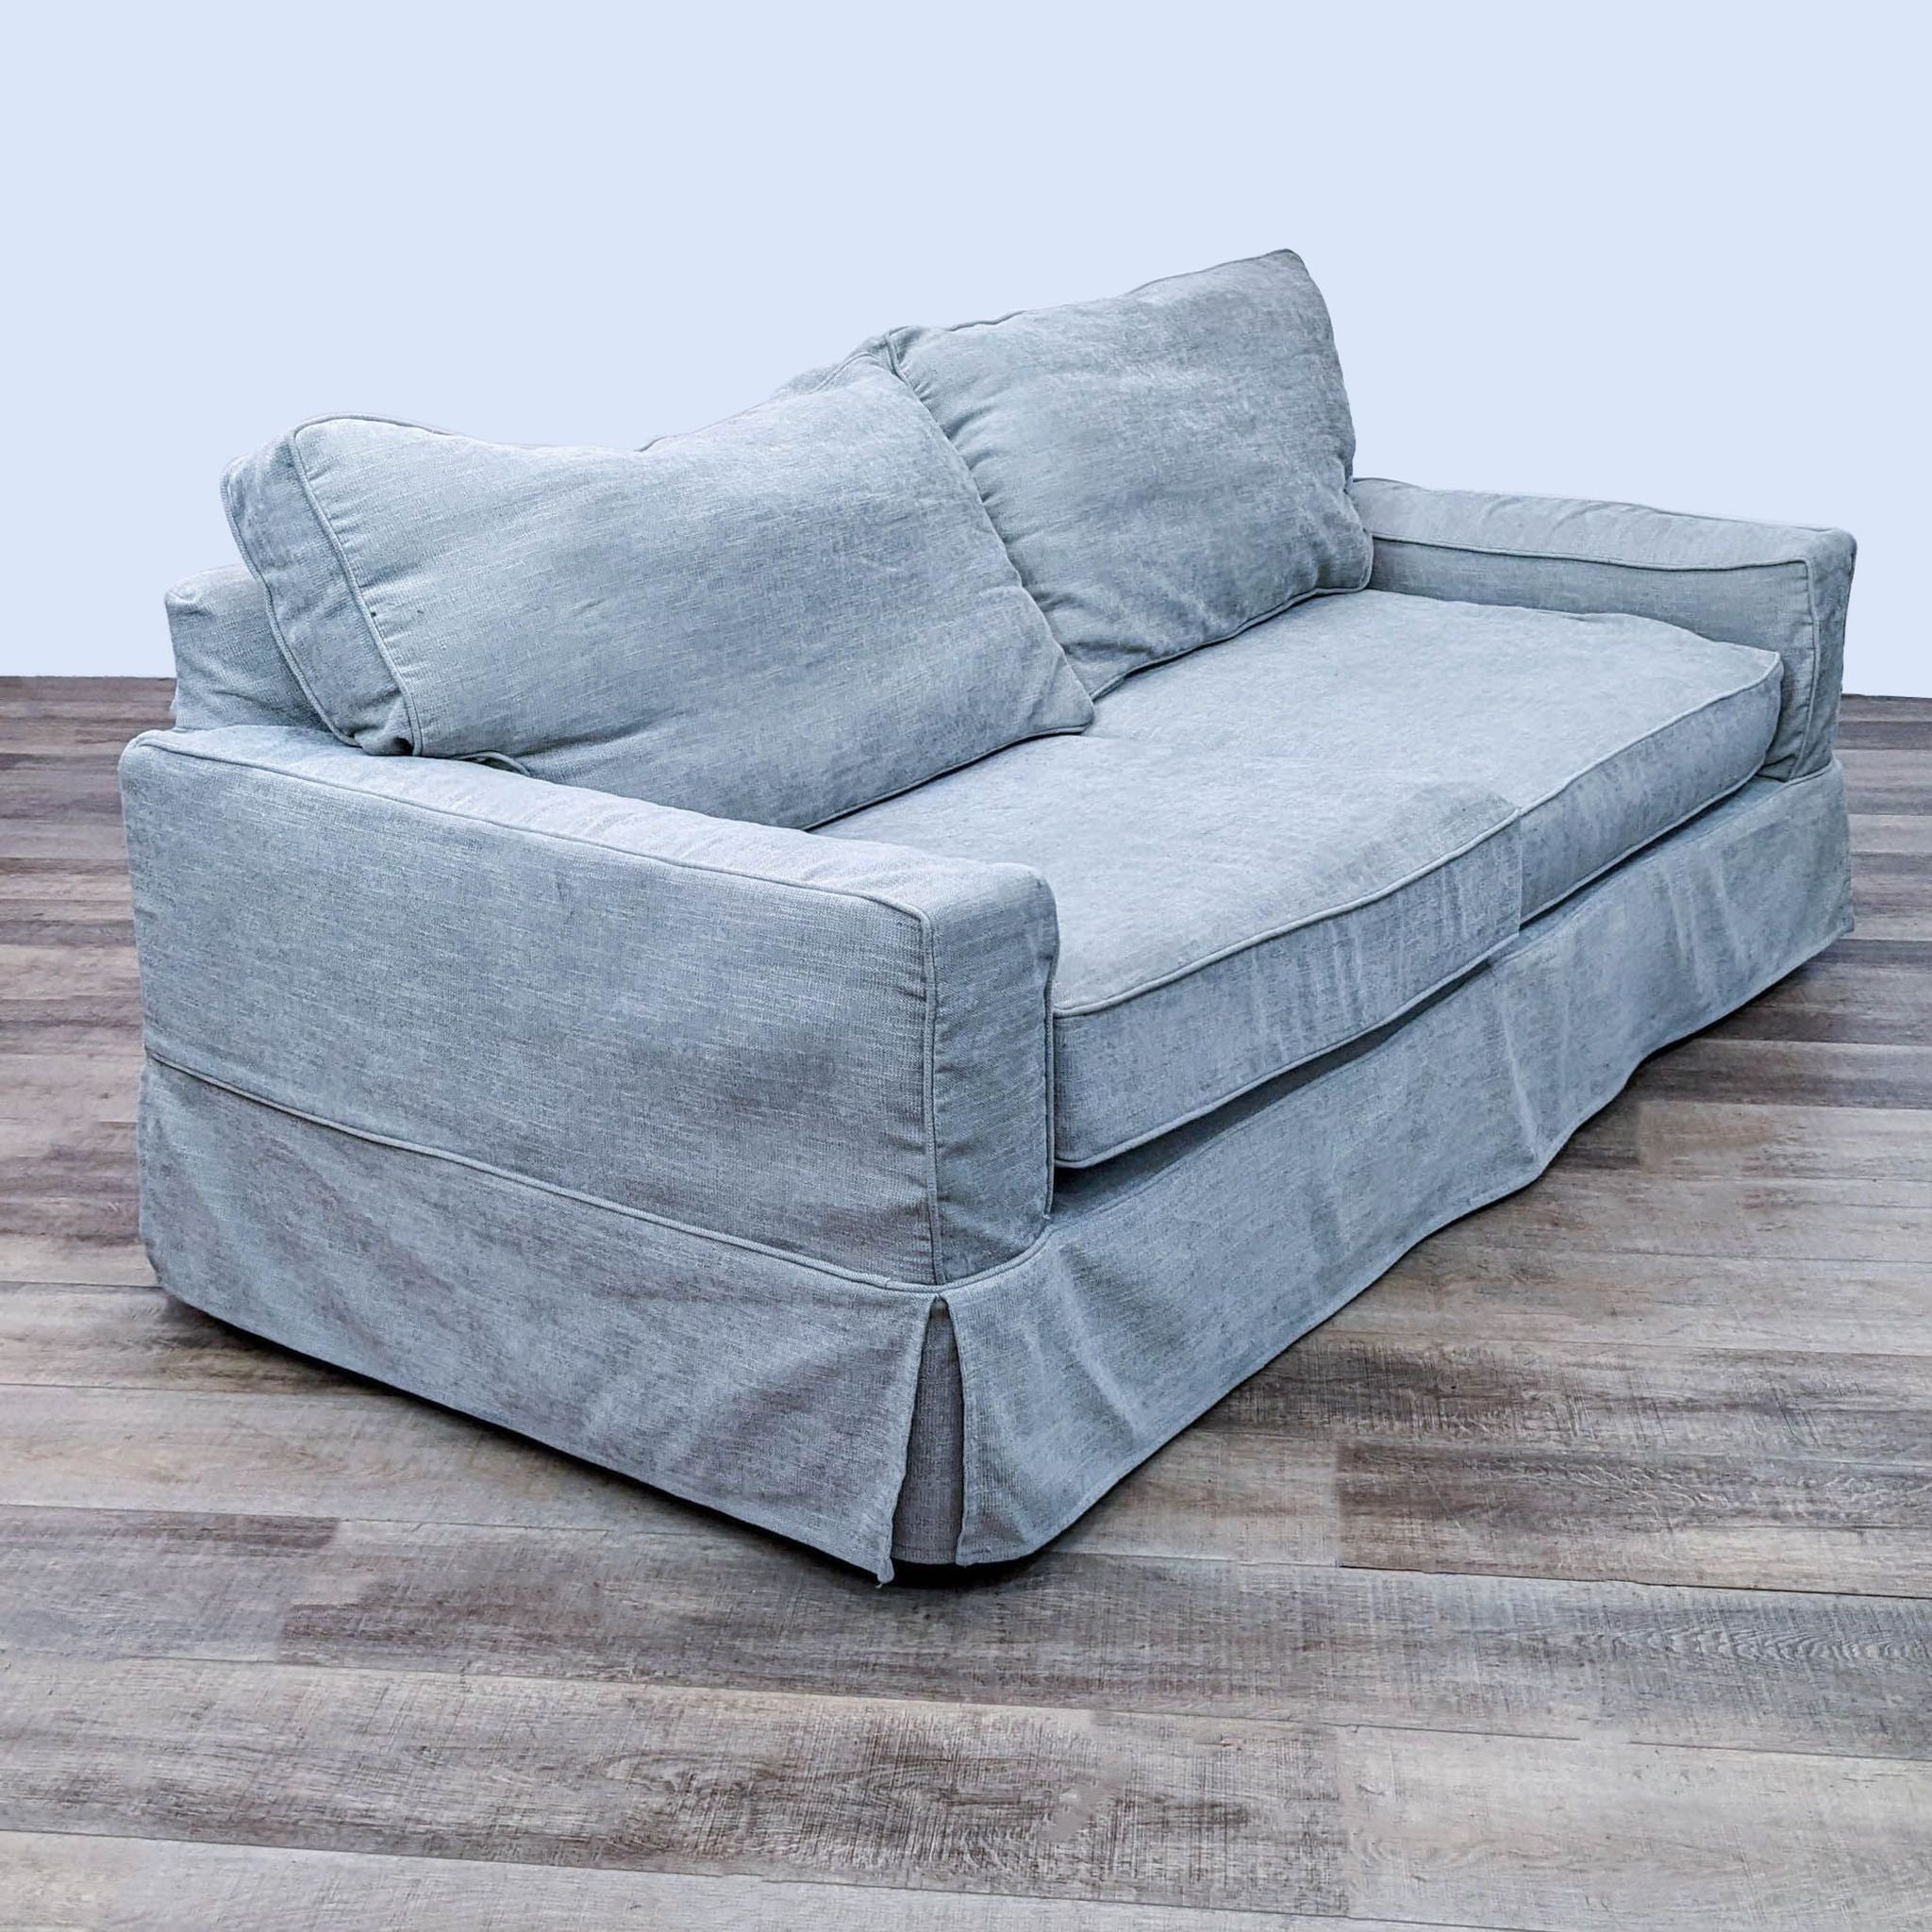 Angled view of a Pottery Barn gray fabric slipcover loveseat showcasing its design and track arms on a wooden surface.